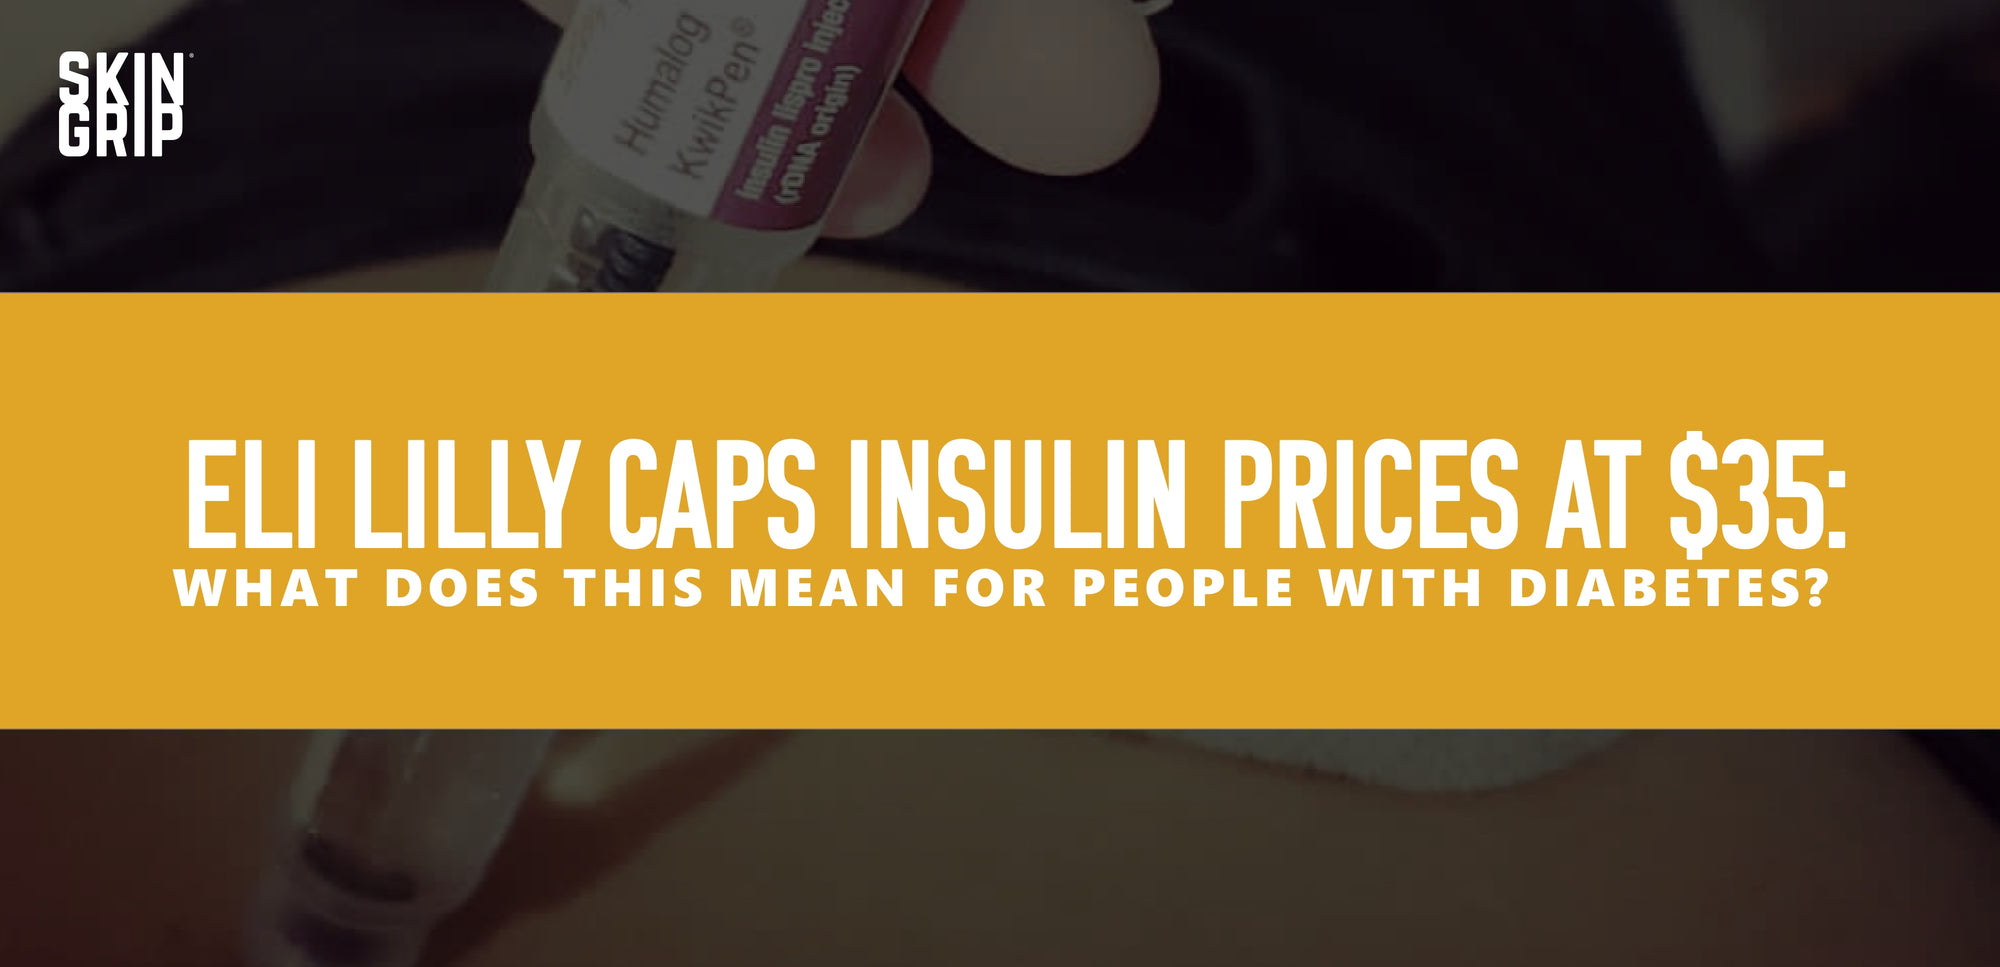 Eli Lilly Caps Insulin Prices at $35: What does this mean for people with diabetes?